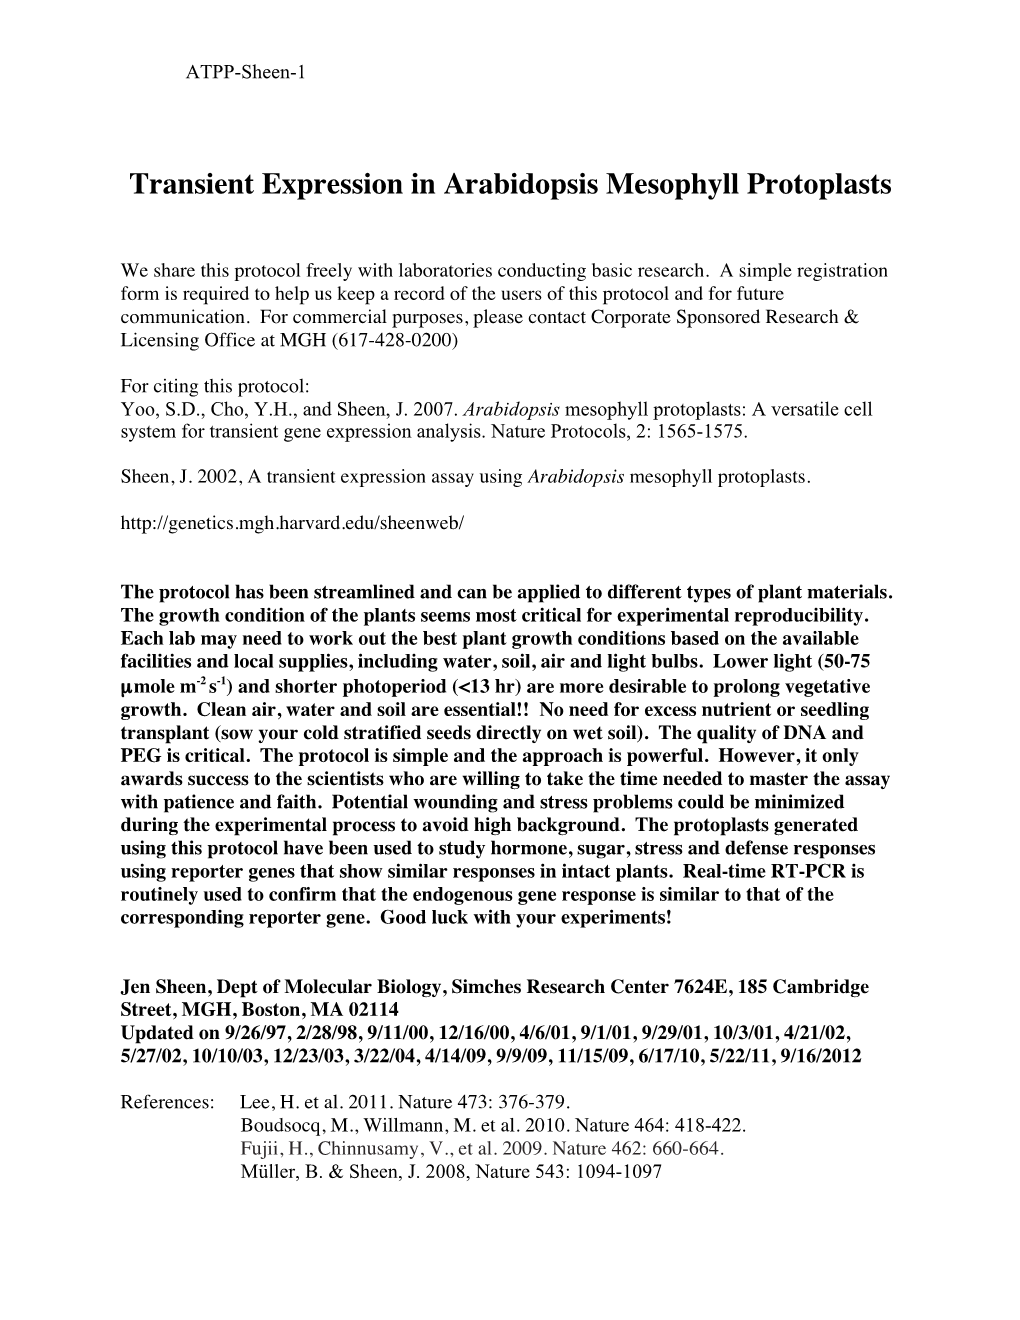 Transient Expression in Arabidopsis Mesophyll Protoplasts